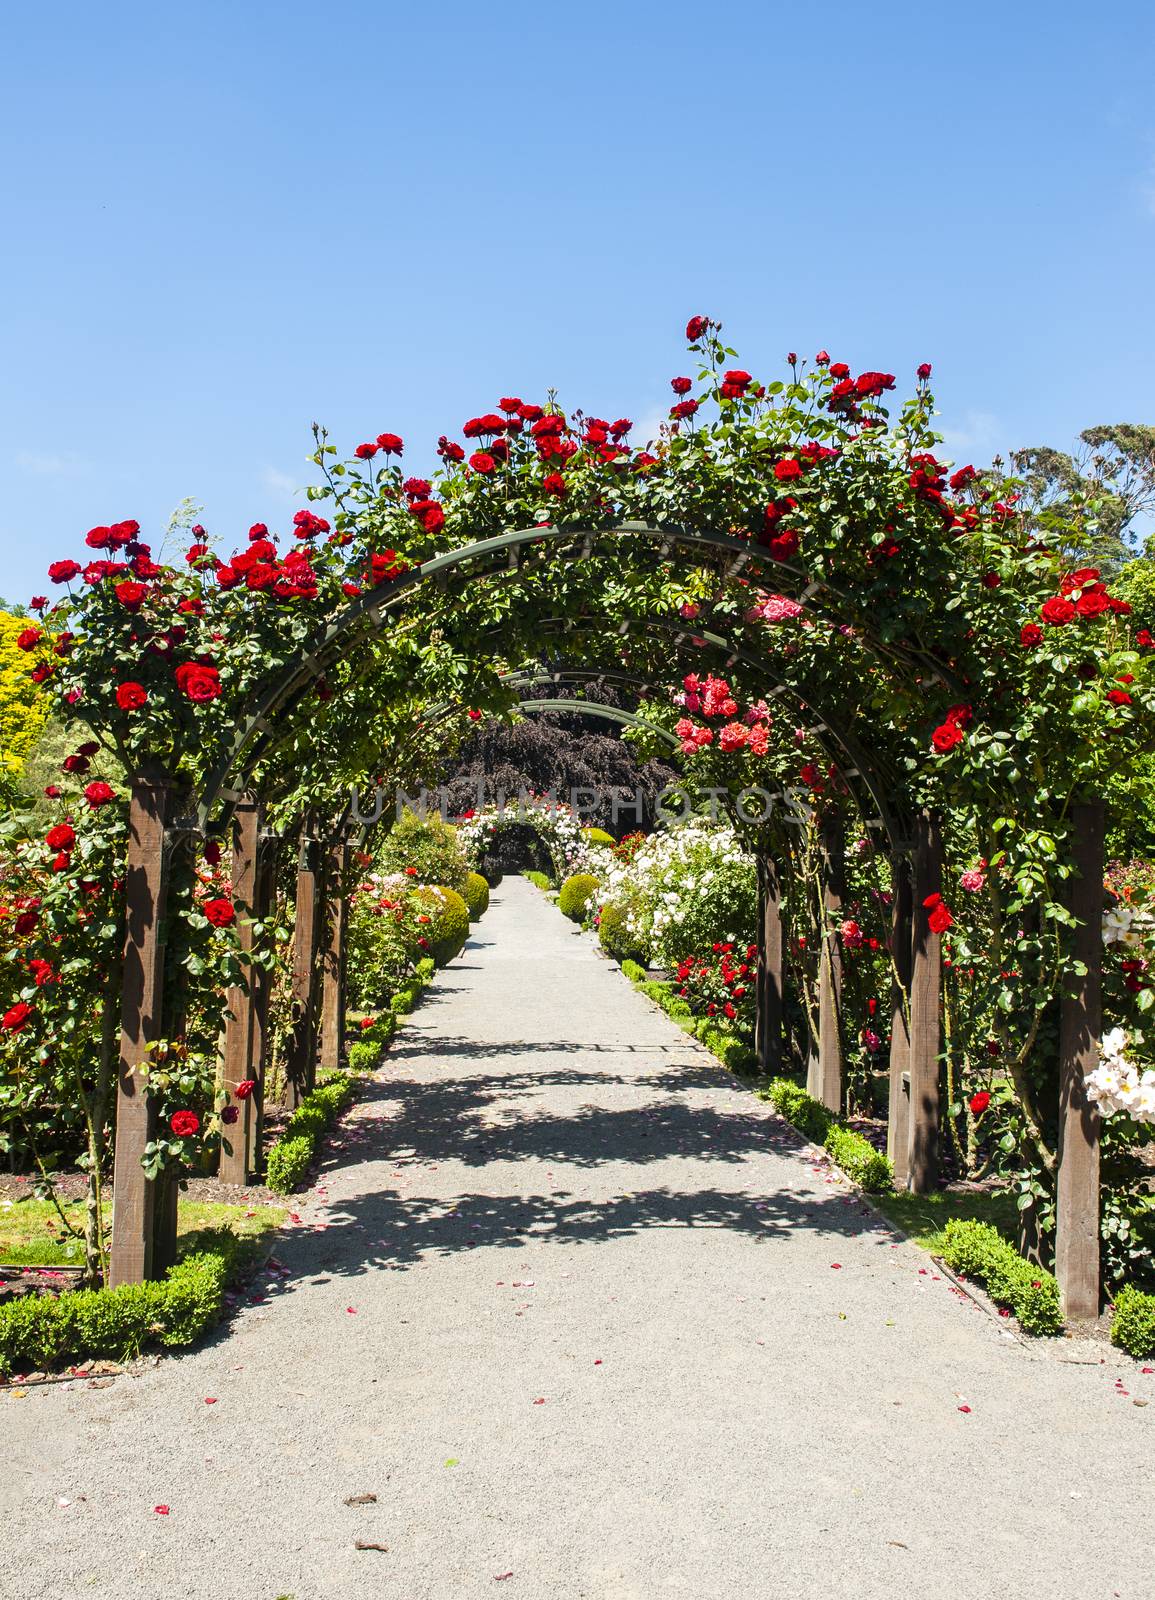 Arch with red roses in the garden by fyletto